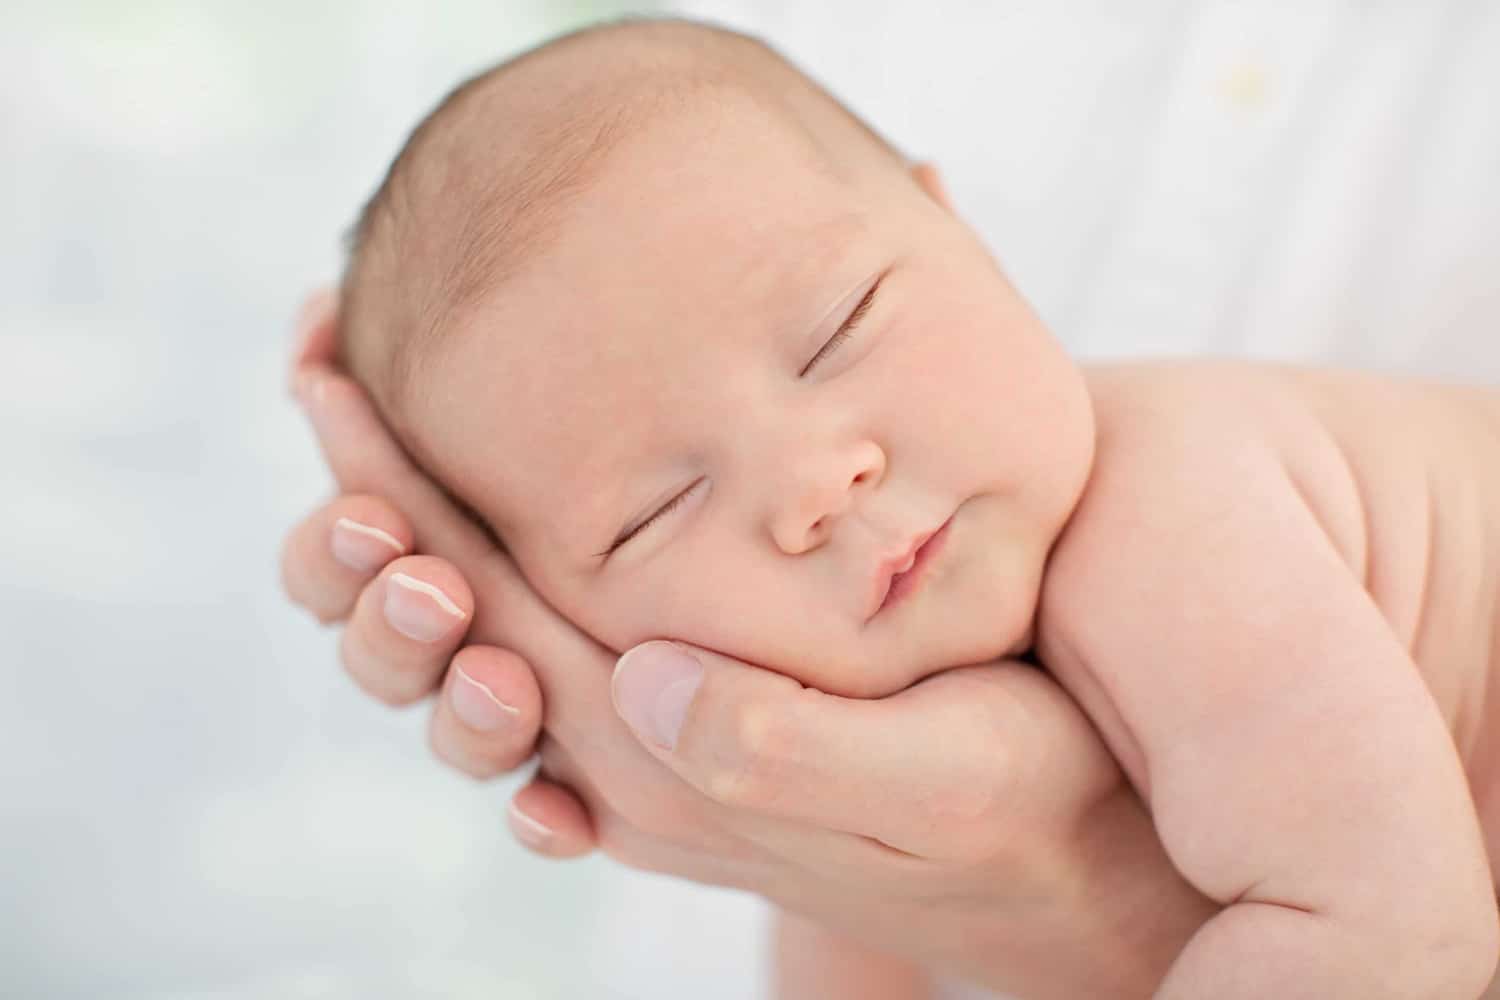 A baby's head lays in someone's hand.